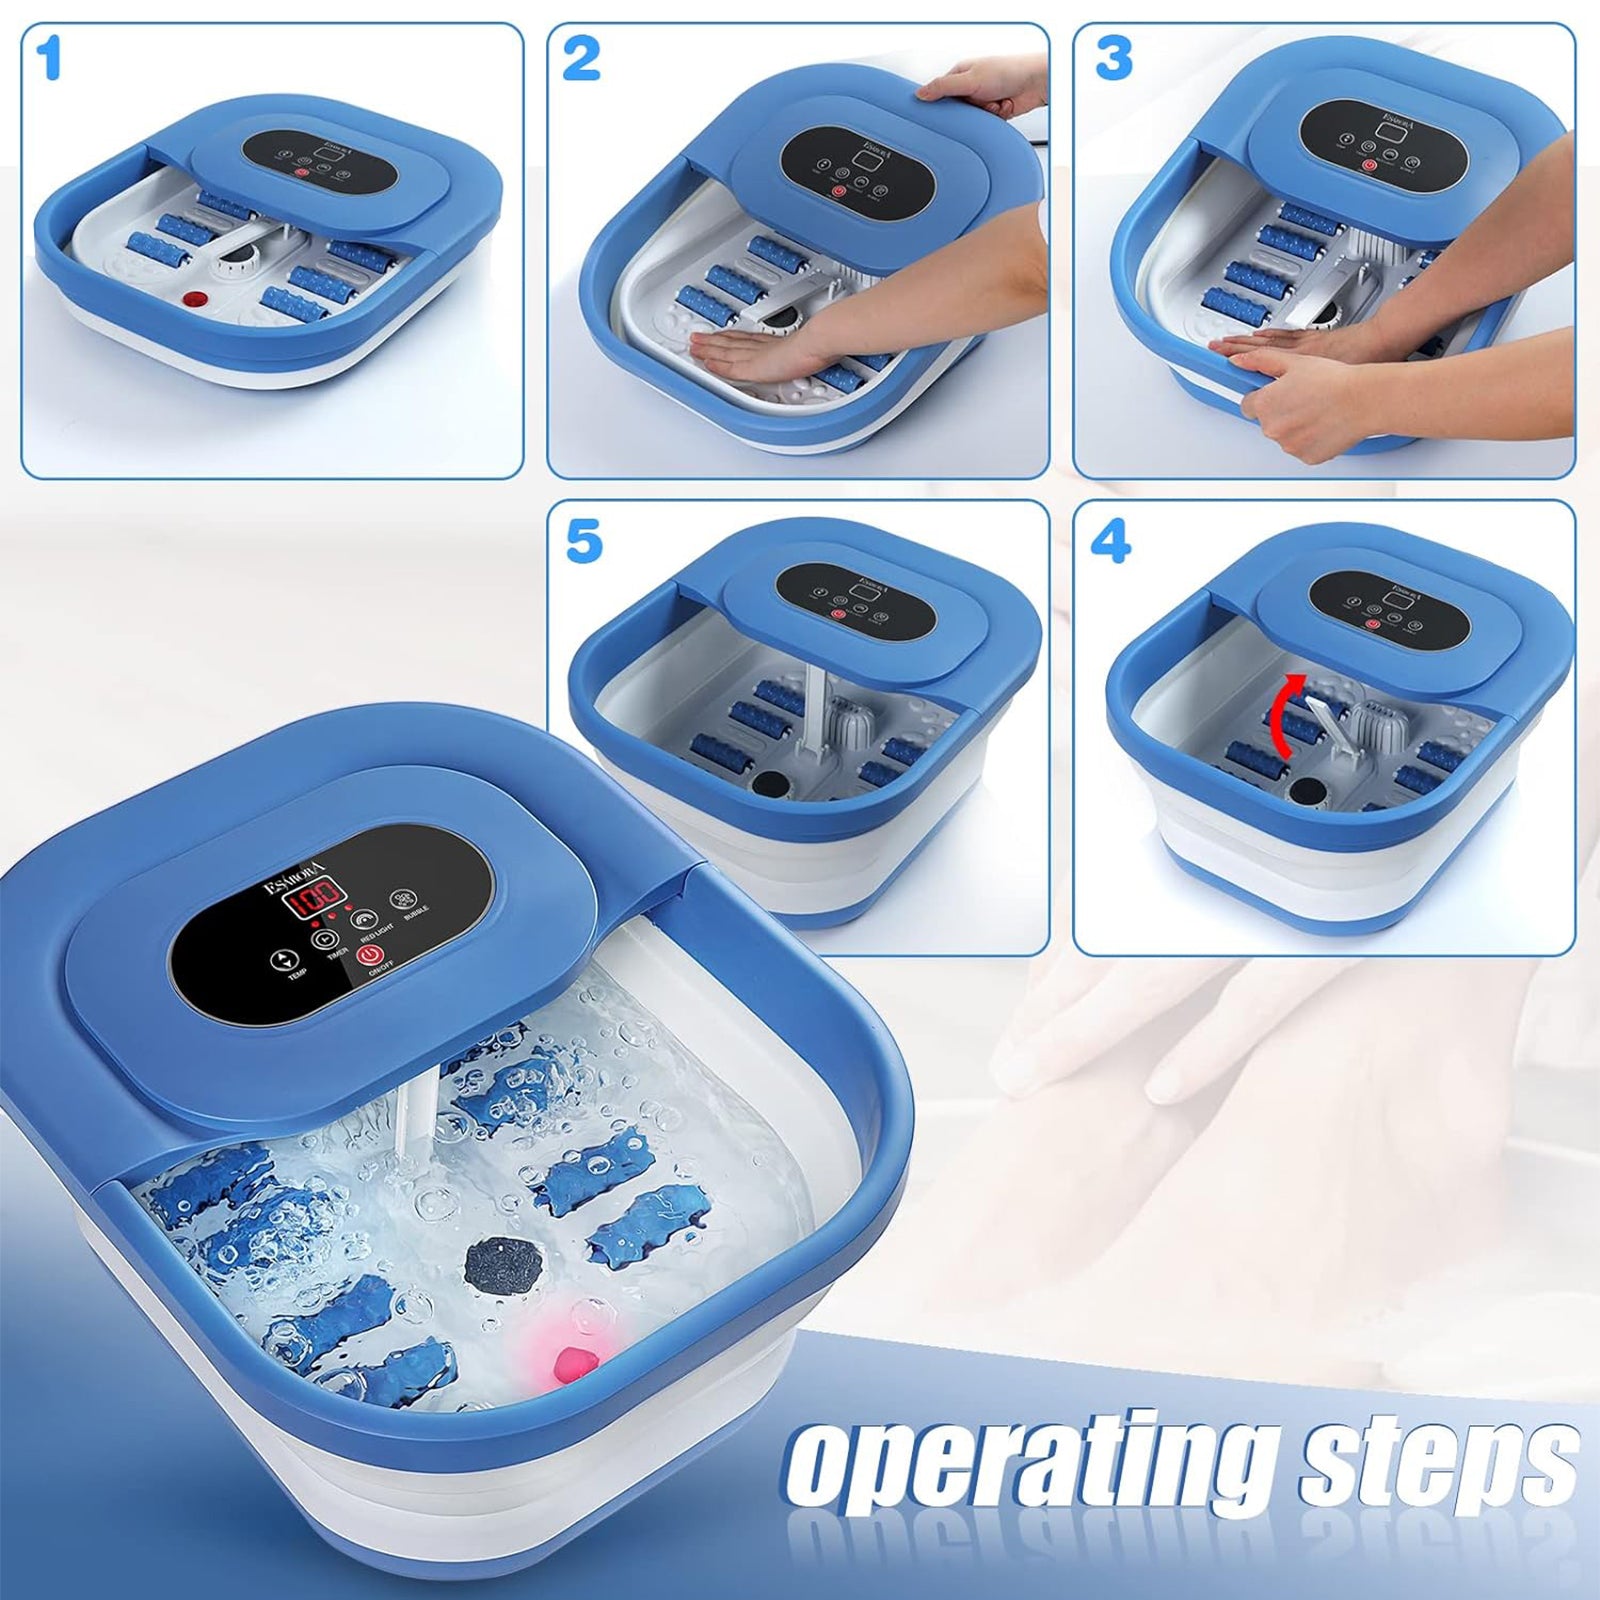 Foldable Foot Massager with Heating, Timer, Red Light, Bubbles, Rollers, Shiatsu Points, Pumice Stone